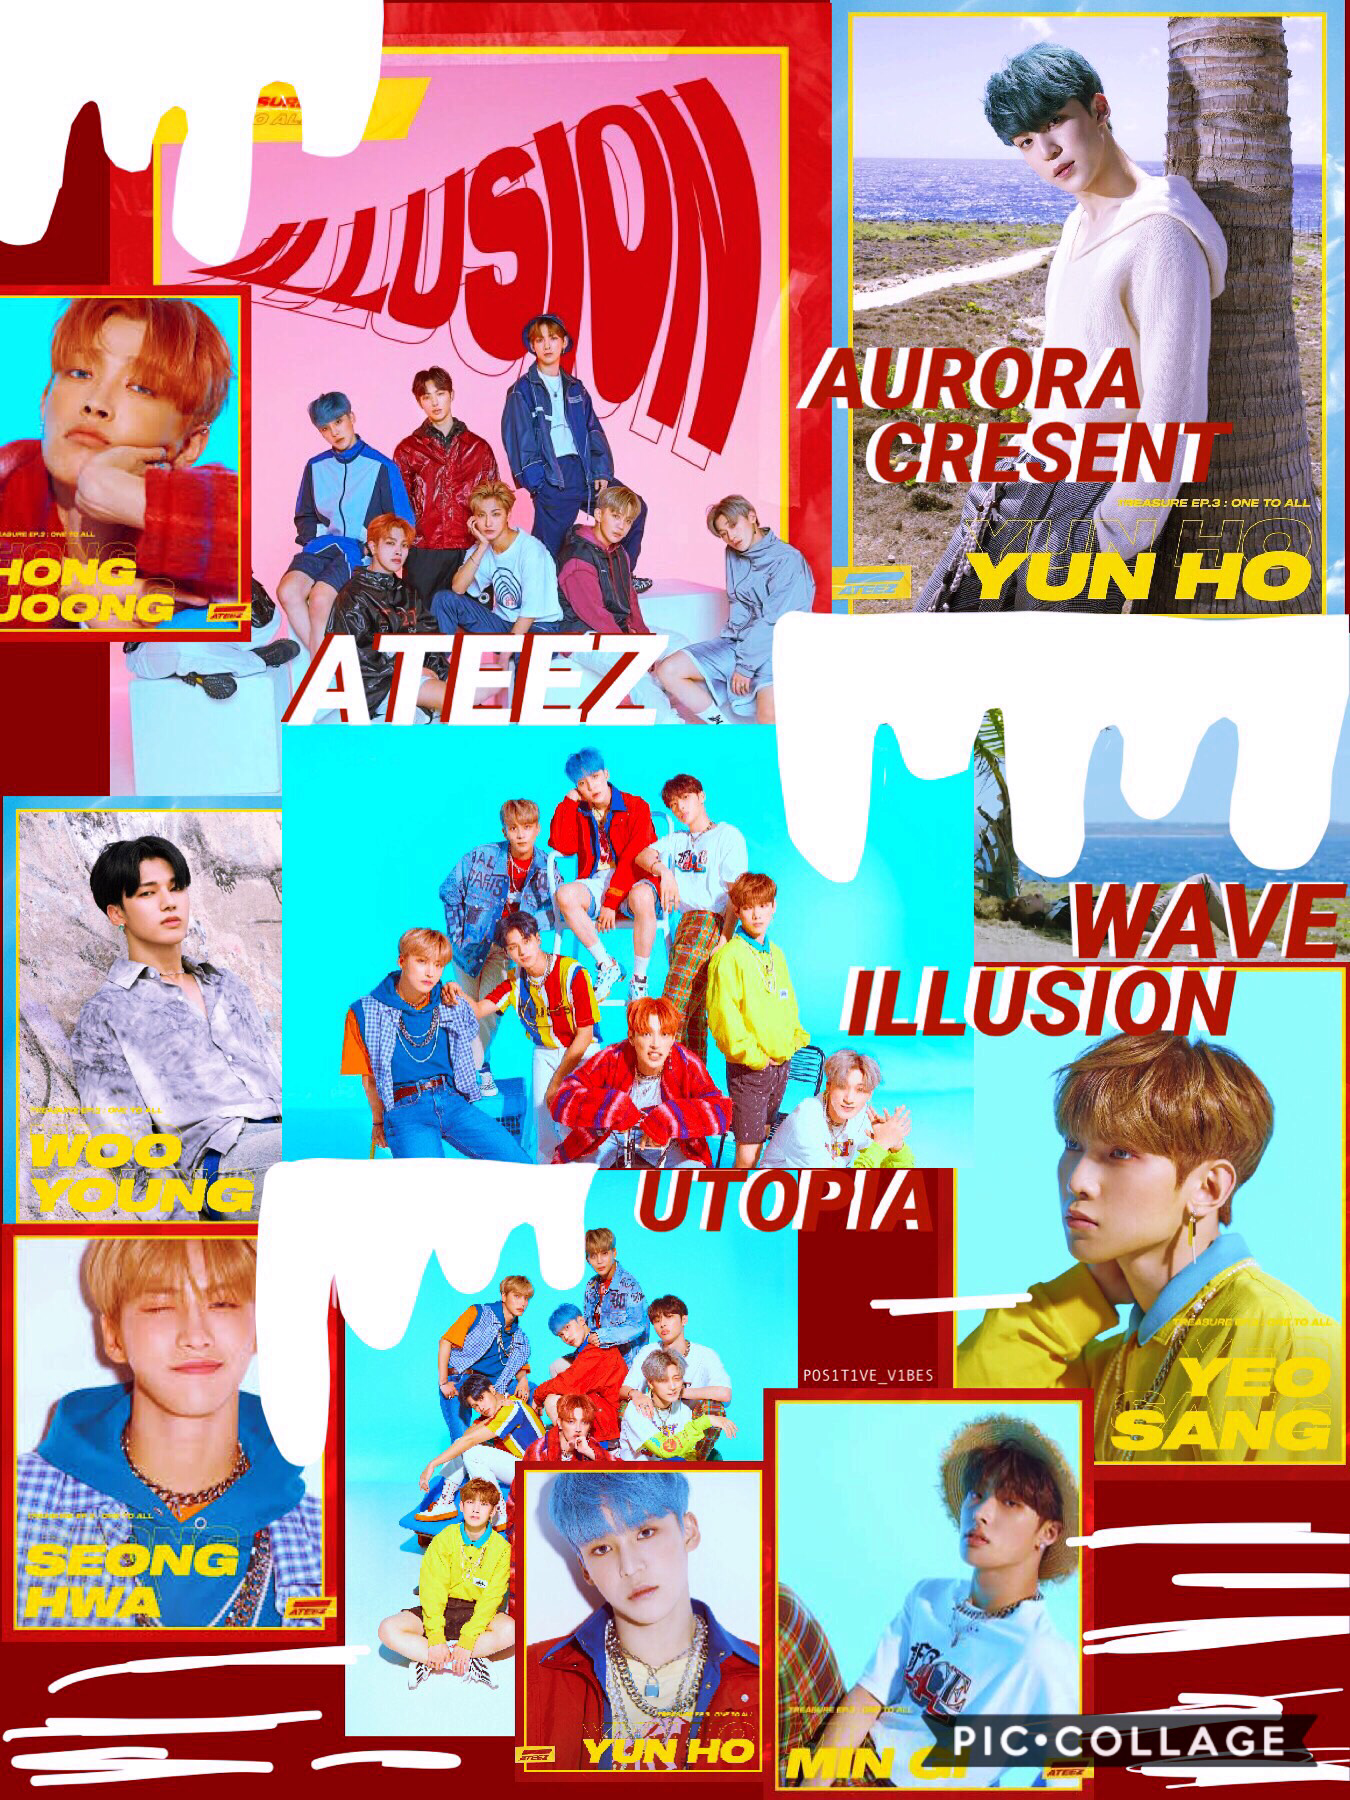 •discarded edit #5 ¯\_(ツ)_/¯•
okAY, ngl ateez’s album is fiRE🔥😤 i couldn’t decide what to do w the text or anything & this is horrible quality so uh,, yep. i should be studying for my French final, not making a collage skskdj okay bye, time to study 😅💓

a